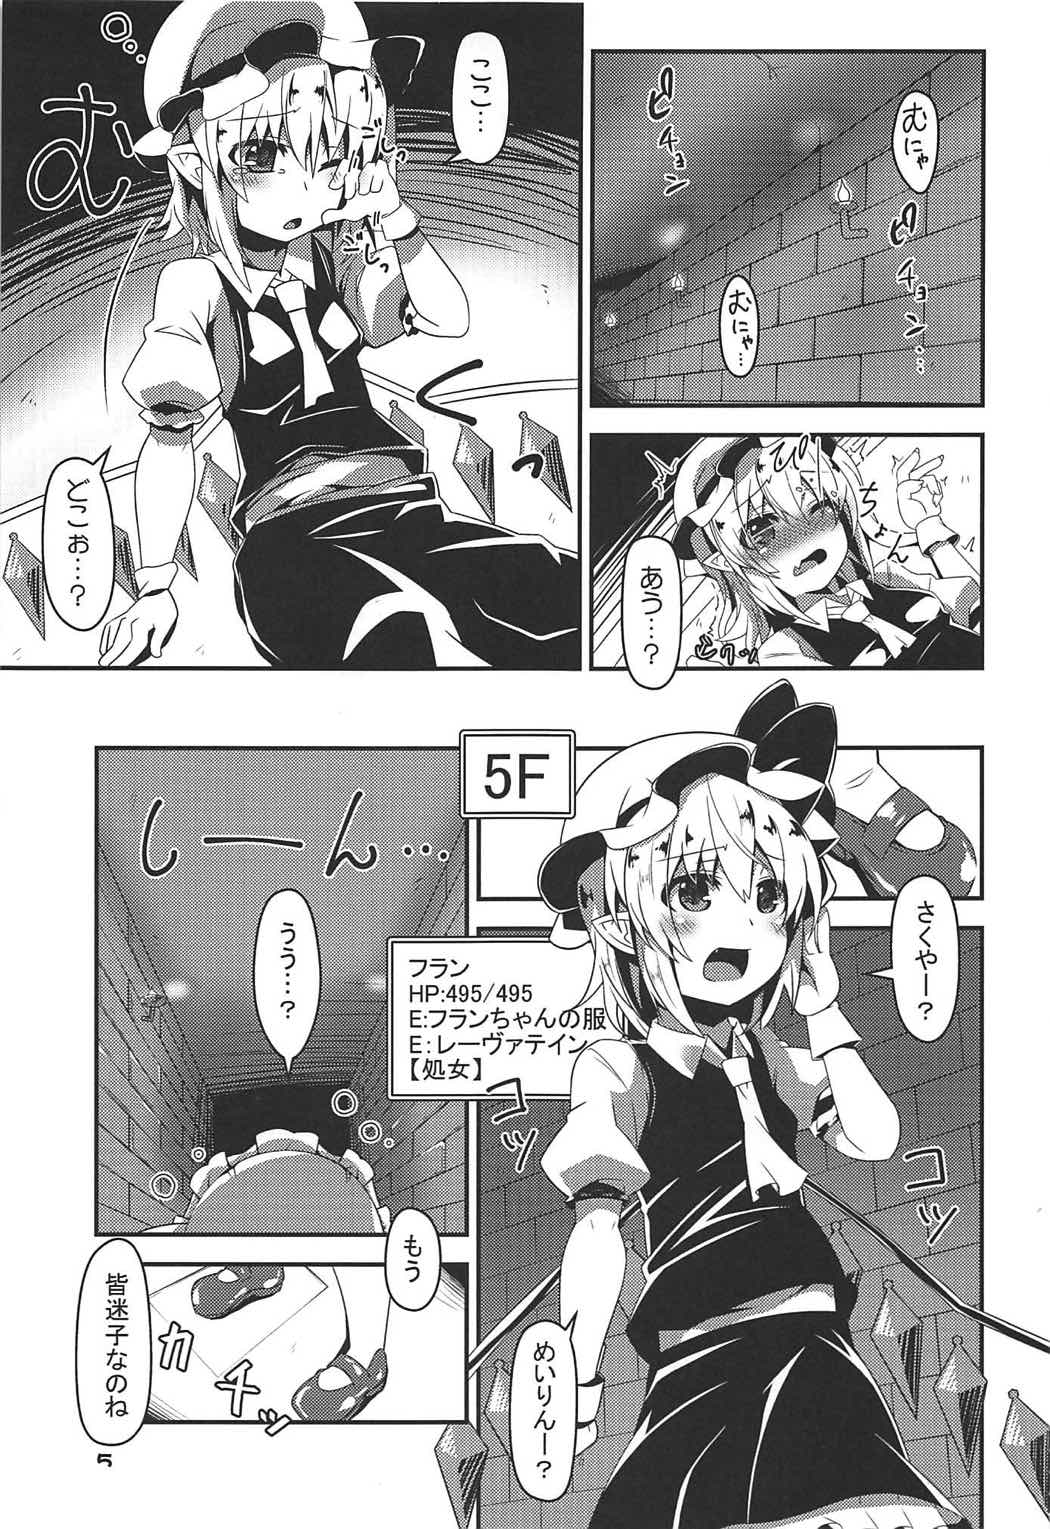 (C92) [Angelic Feather (Land Sale)] Flan-chan no Ero Trap Dungeon tentacle palace (Touhou Project) page 4 full